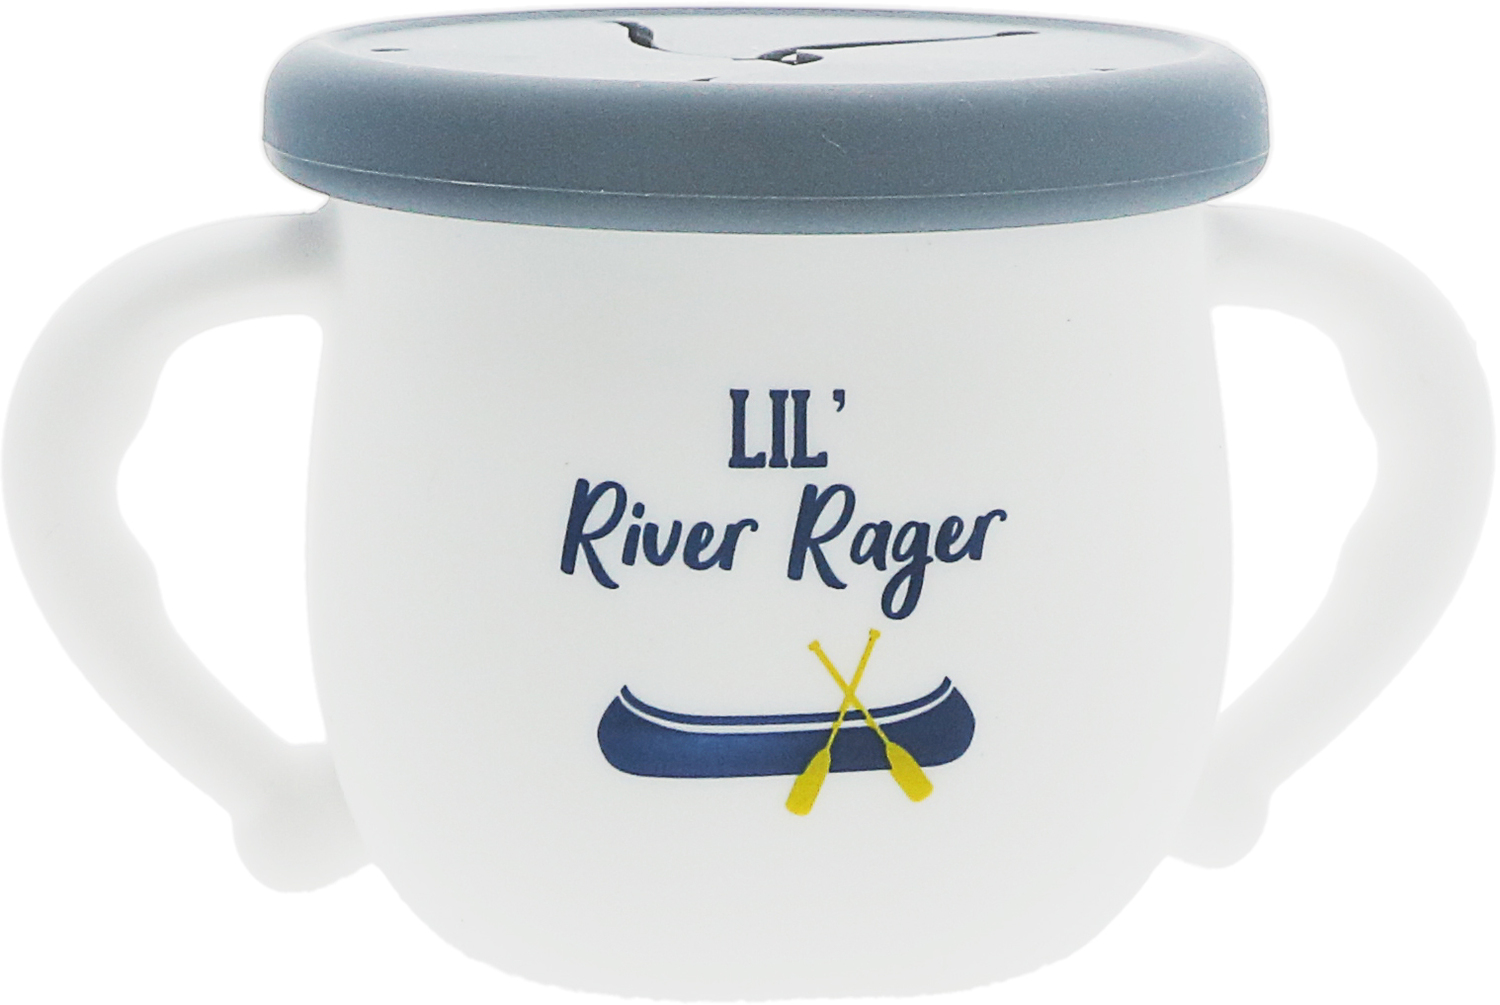 River Rager by We Baby - River Rager - 3.5" Silicone Snack Bowl with Lid